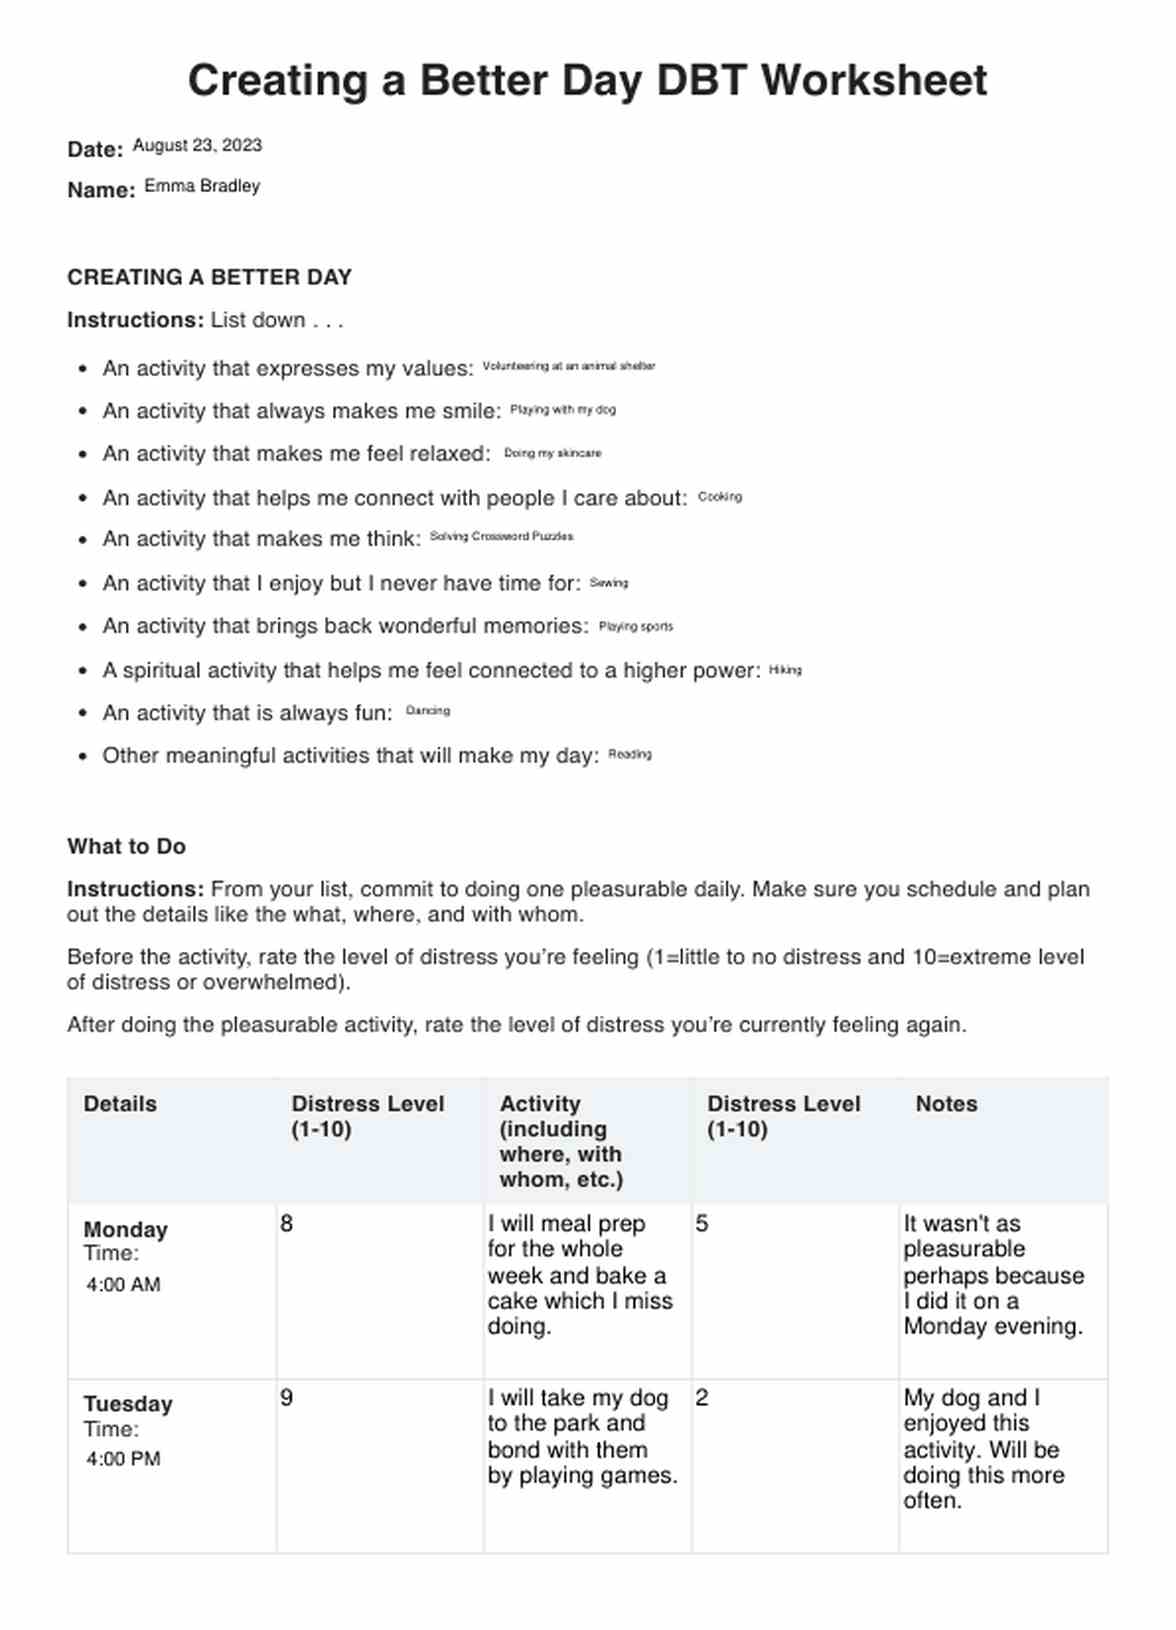 Creating a Better Day DBT Worksheet PDF Example